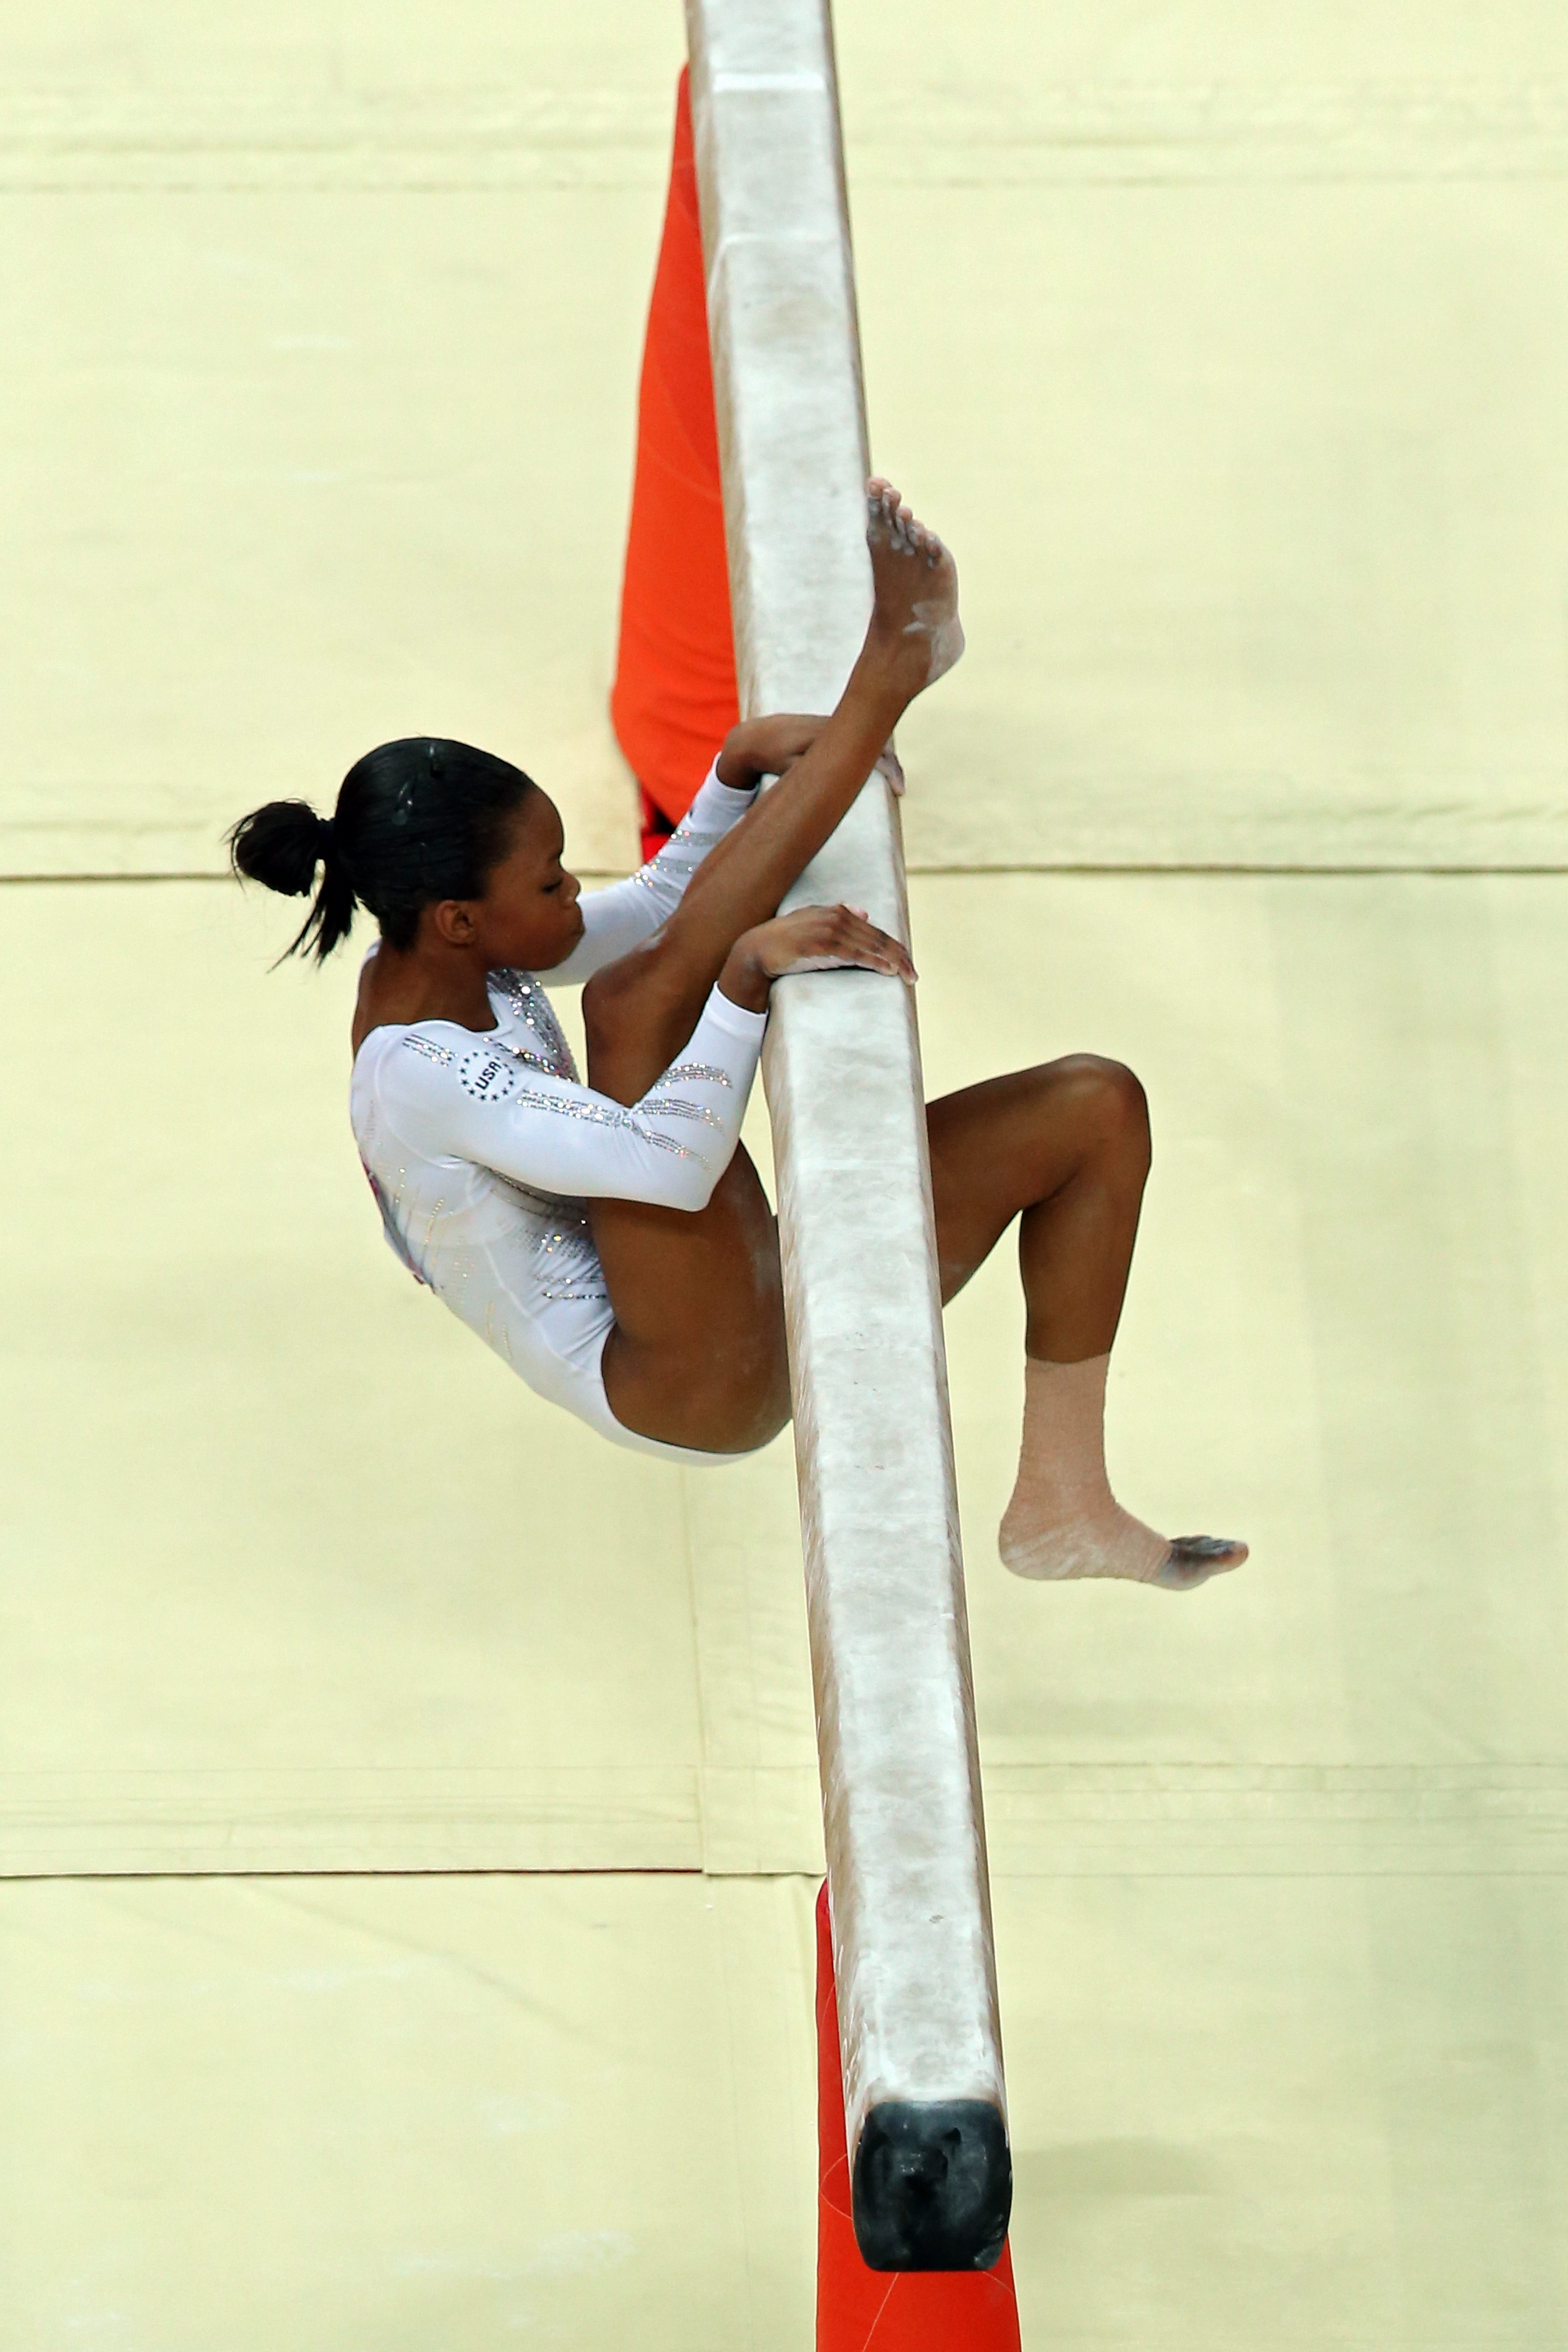 Gabrielle Douglas of the United States falls off the beam during the Artistic Gymnastics Women's Beam final on Day 11 of the London 2012 Olympic Games at North Greenwich Arena on August 7, 2012 in London, England. | Source: Getty Images